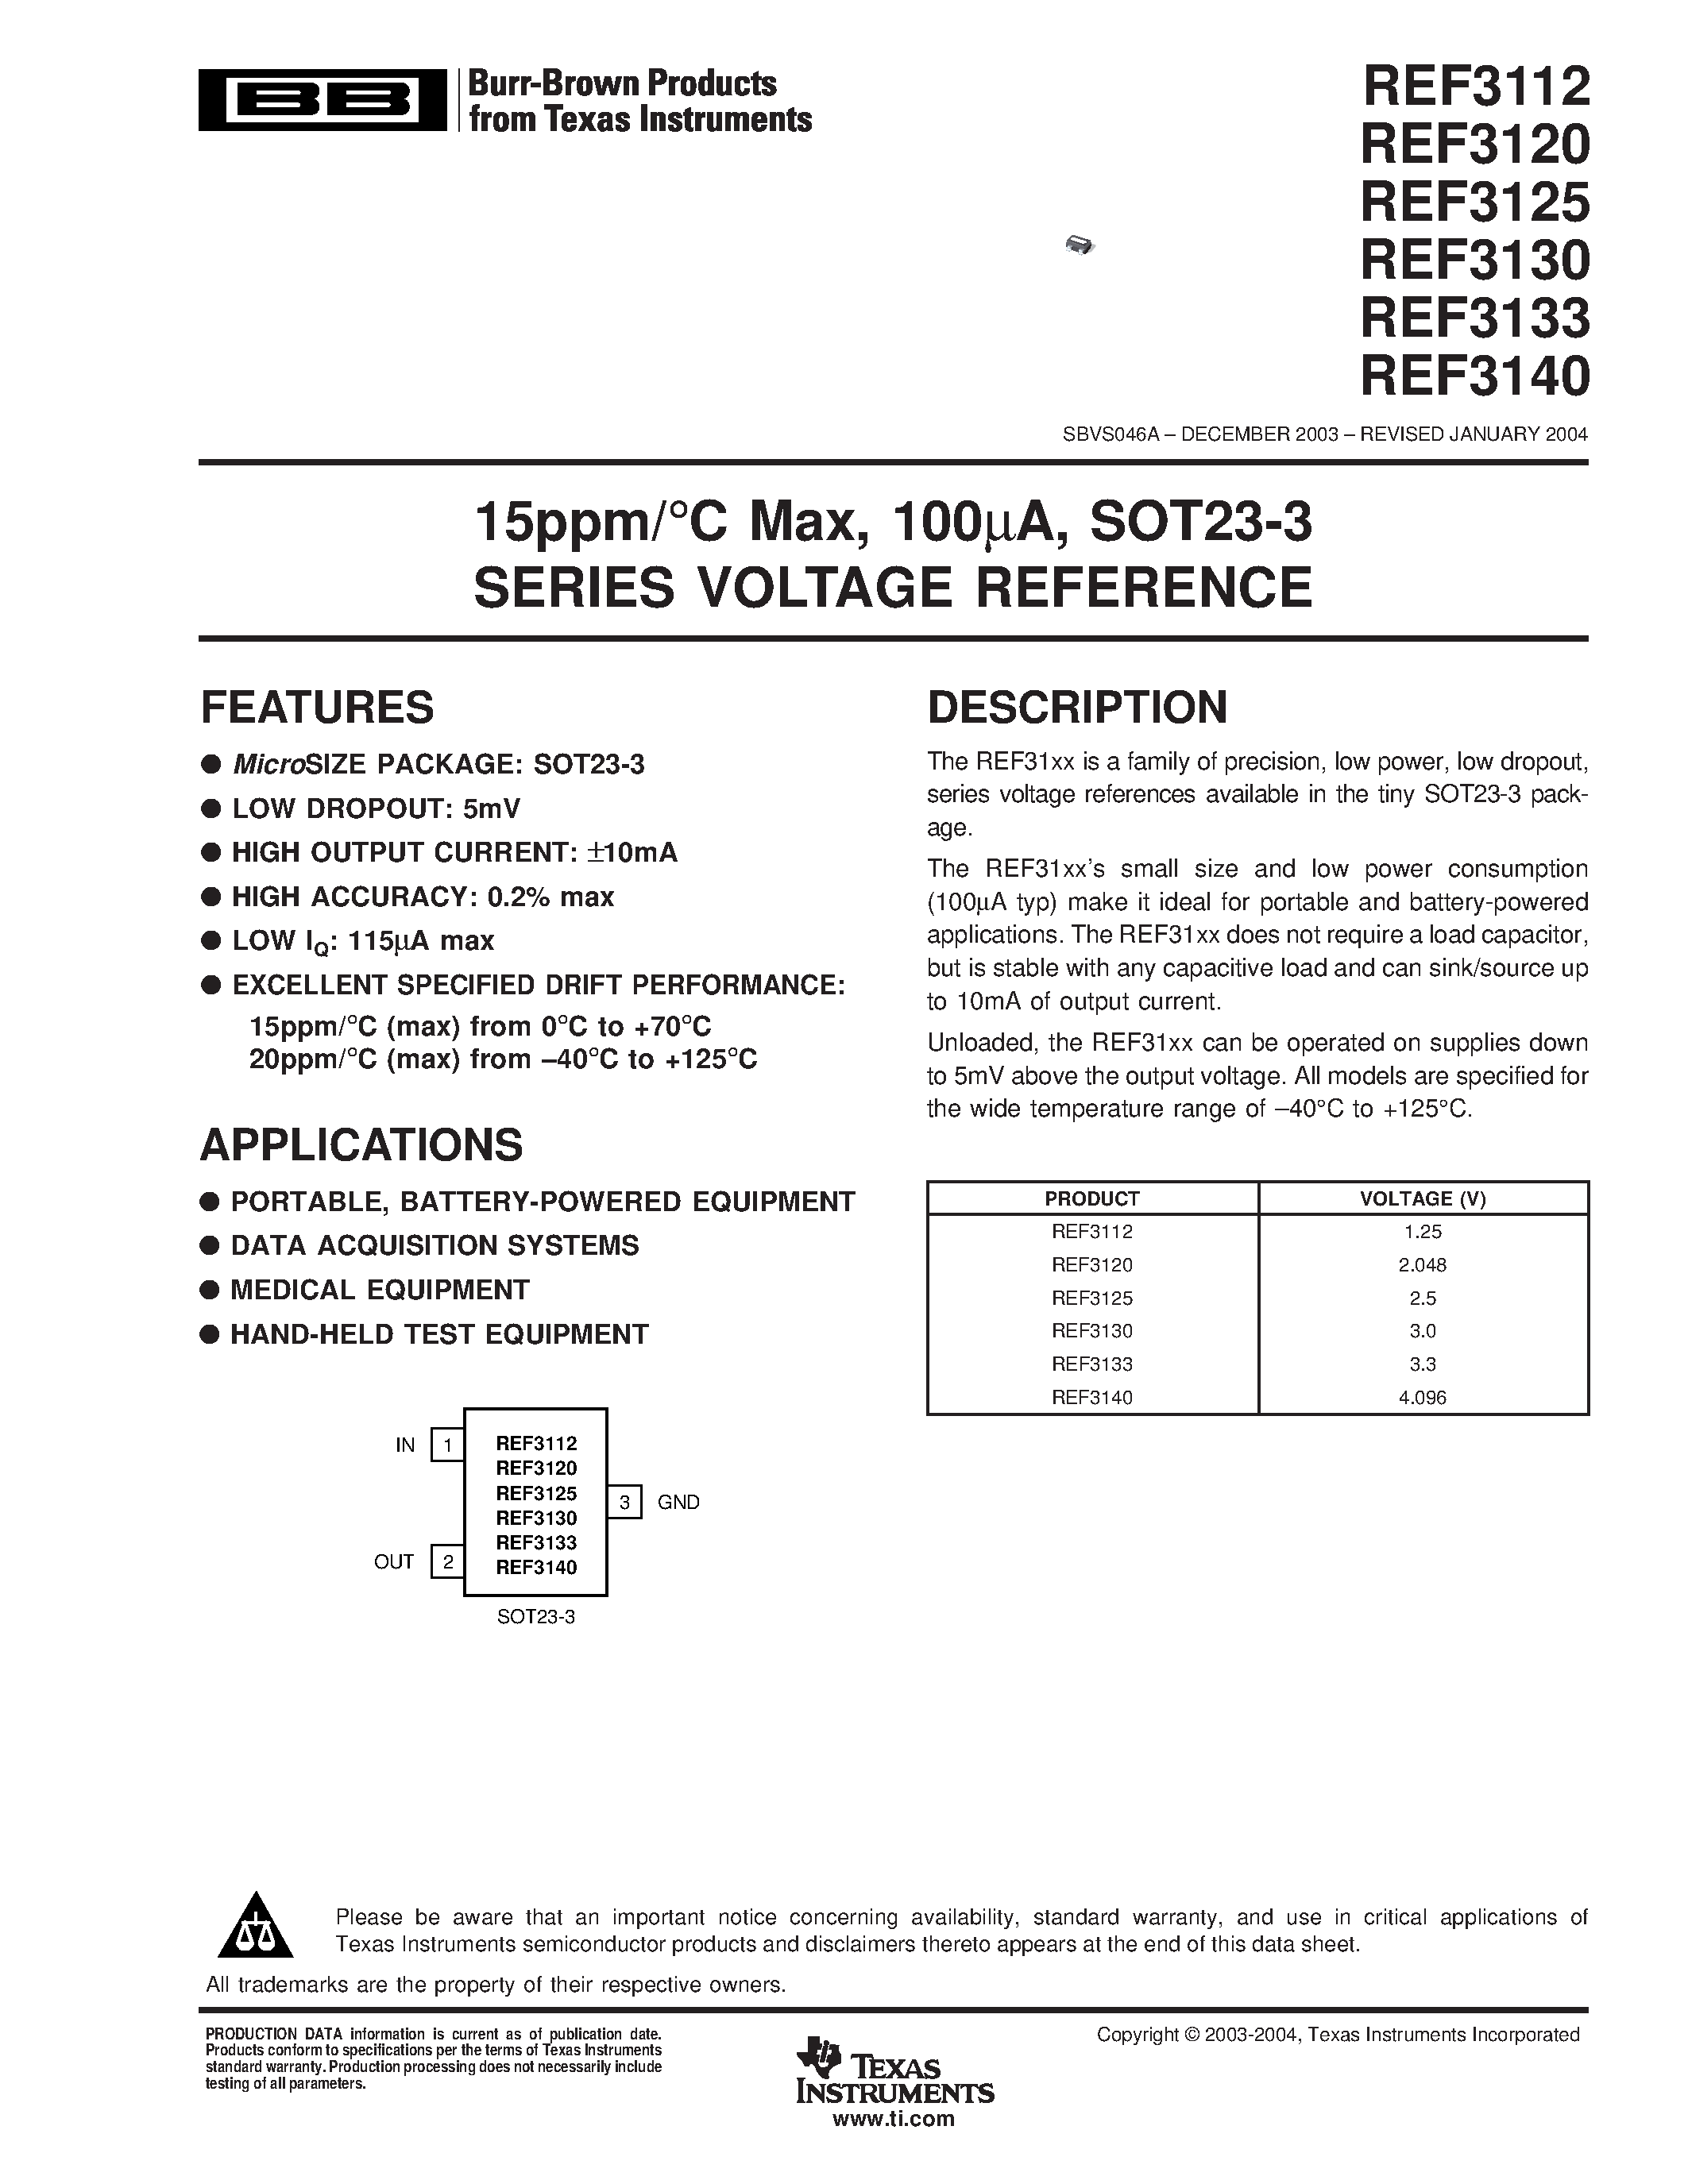 Даташит REF3133 - 15ppm/C Max/ 100UA/ SOT23-3 SERIES VOLTAGE REFERENCE страница 1